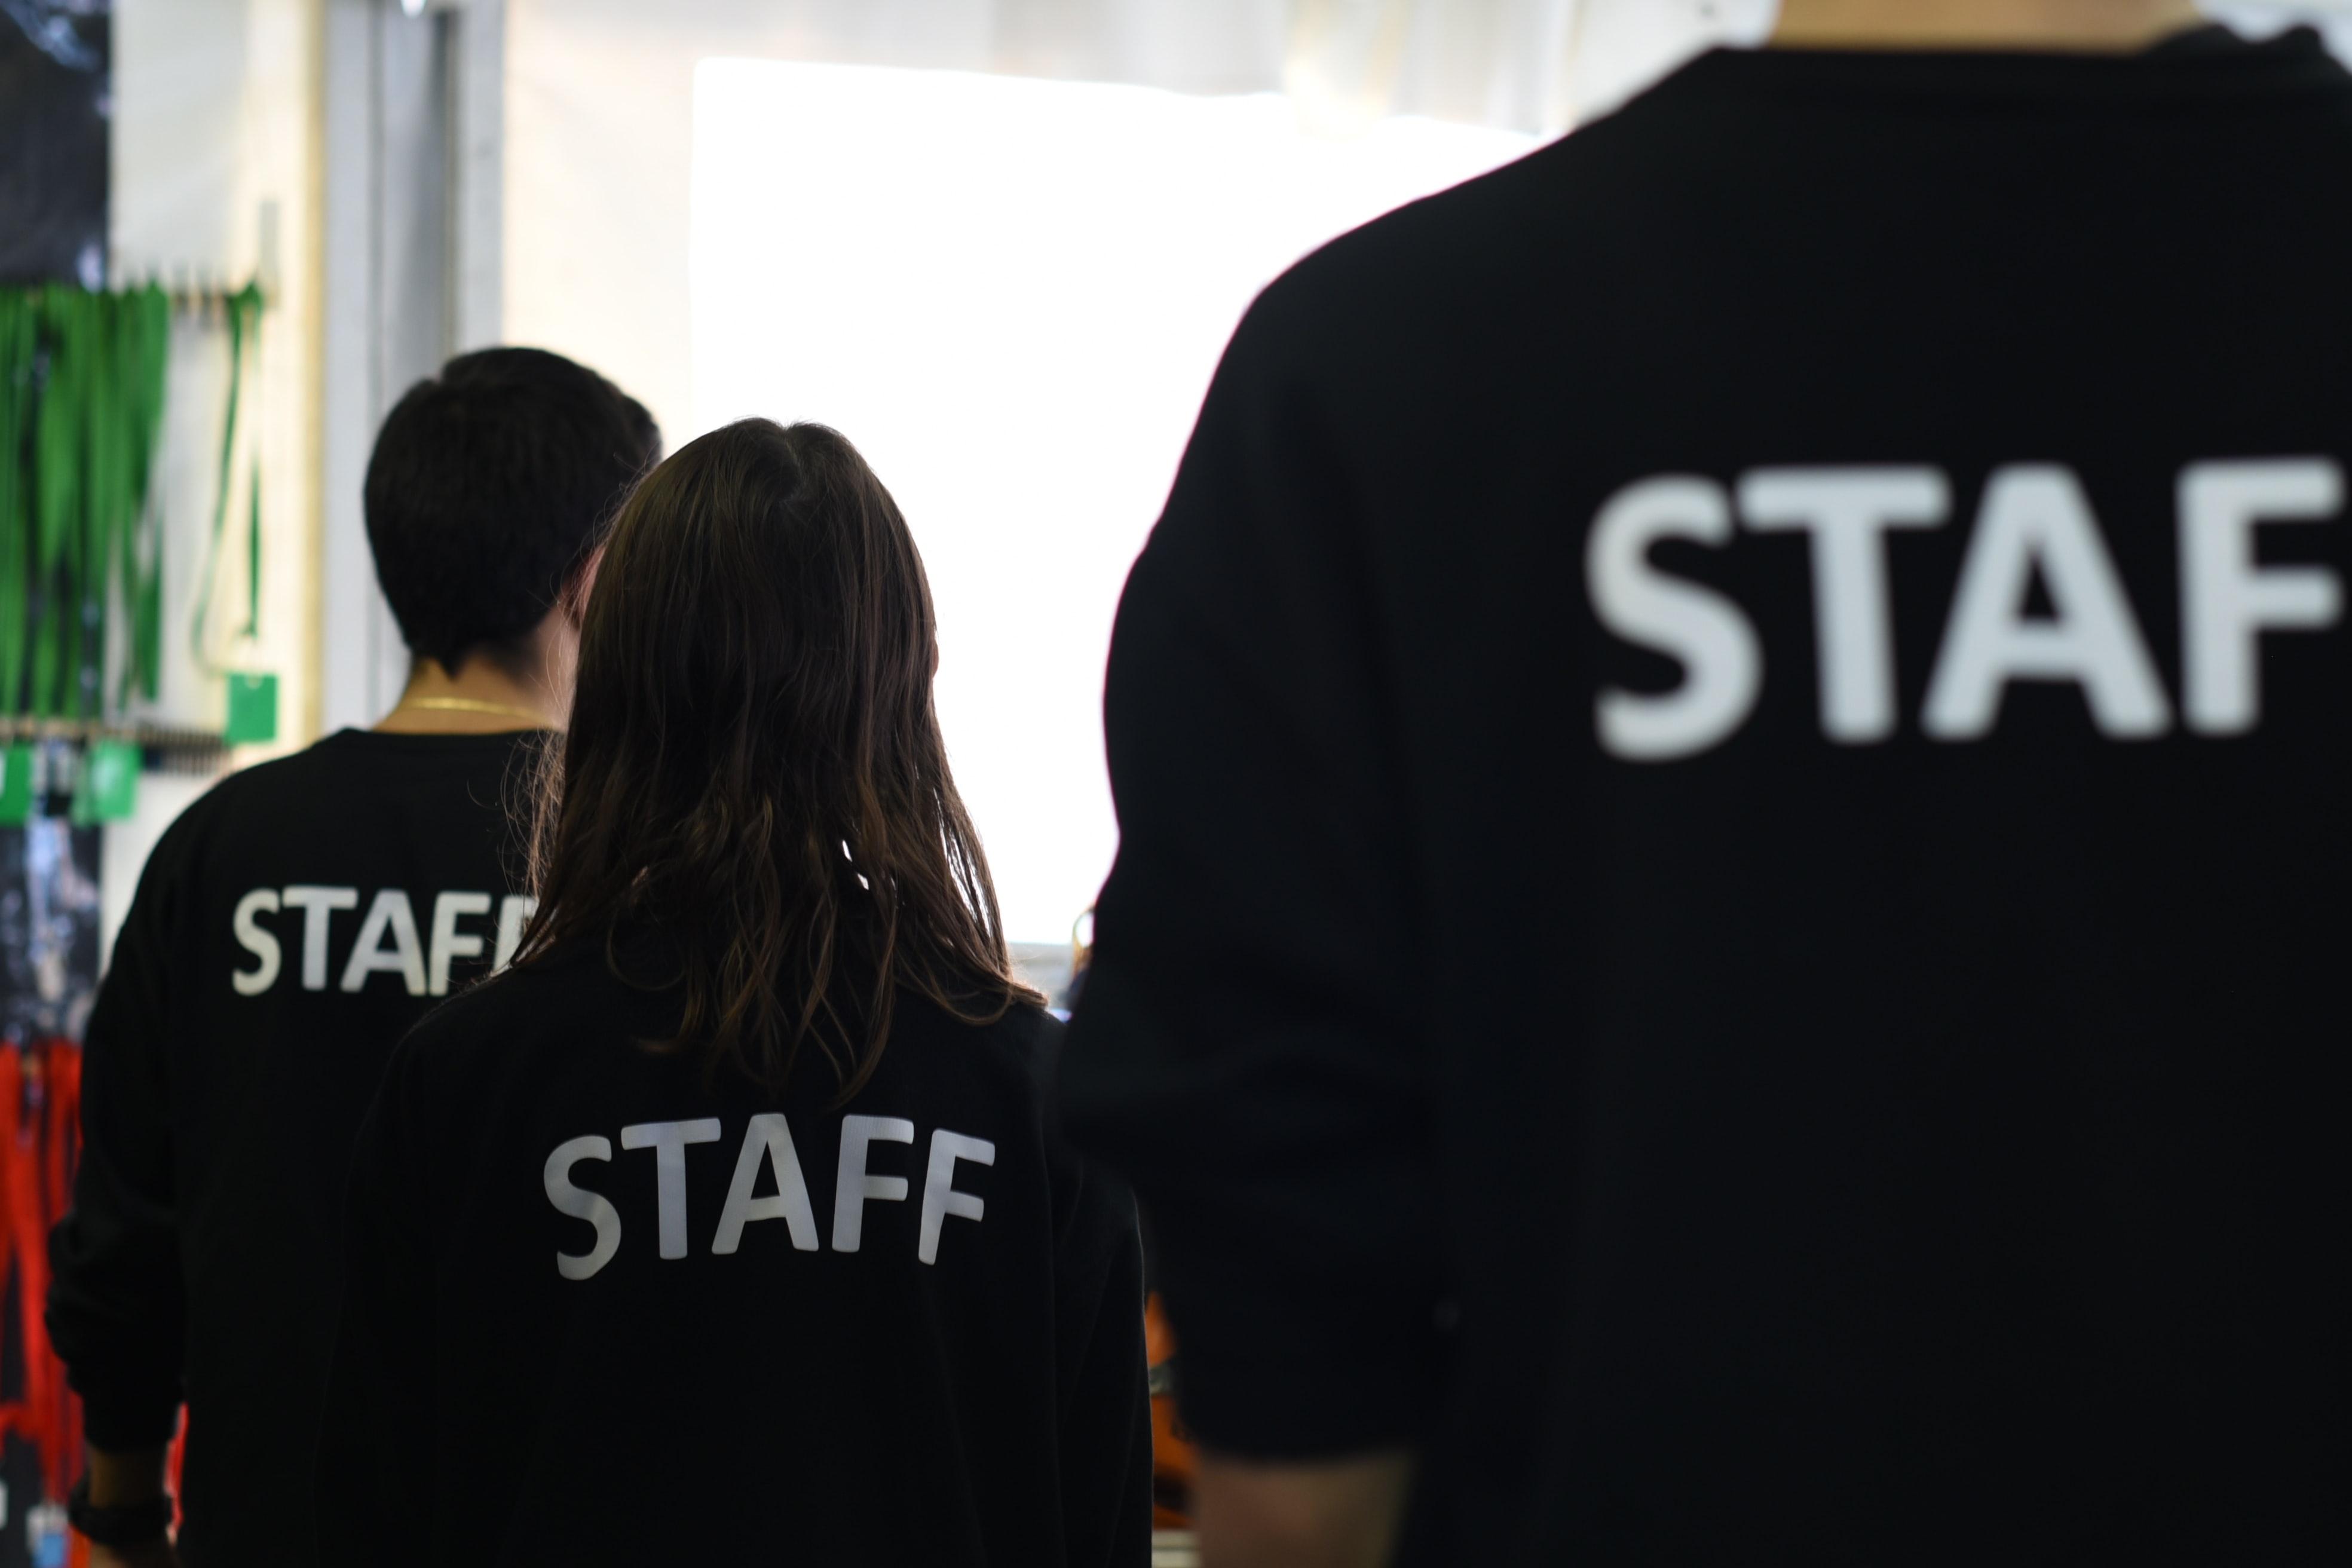 three workers photographed from the back wearing t-shirts with the words “STAFF" on tthem